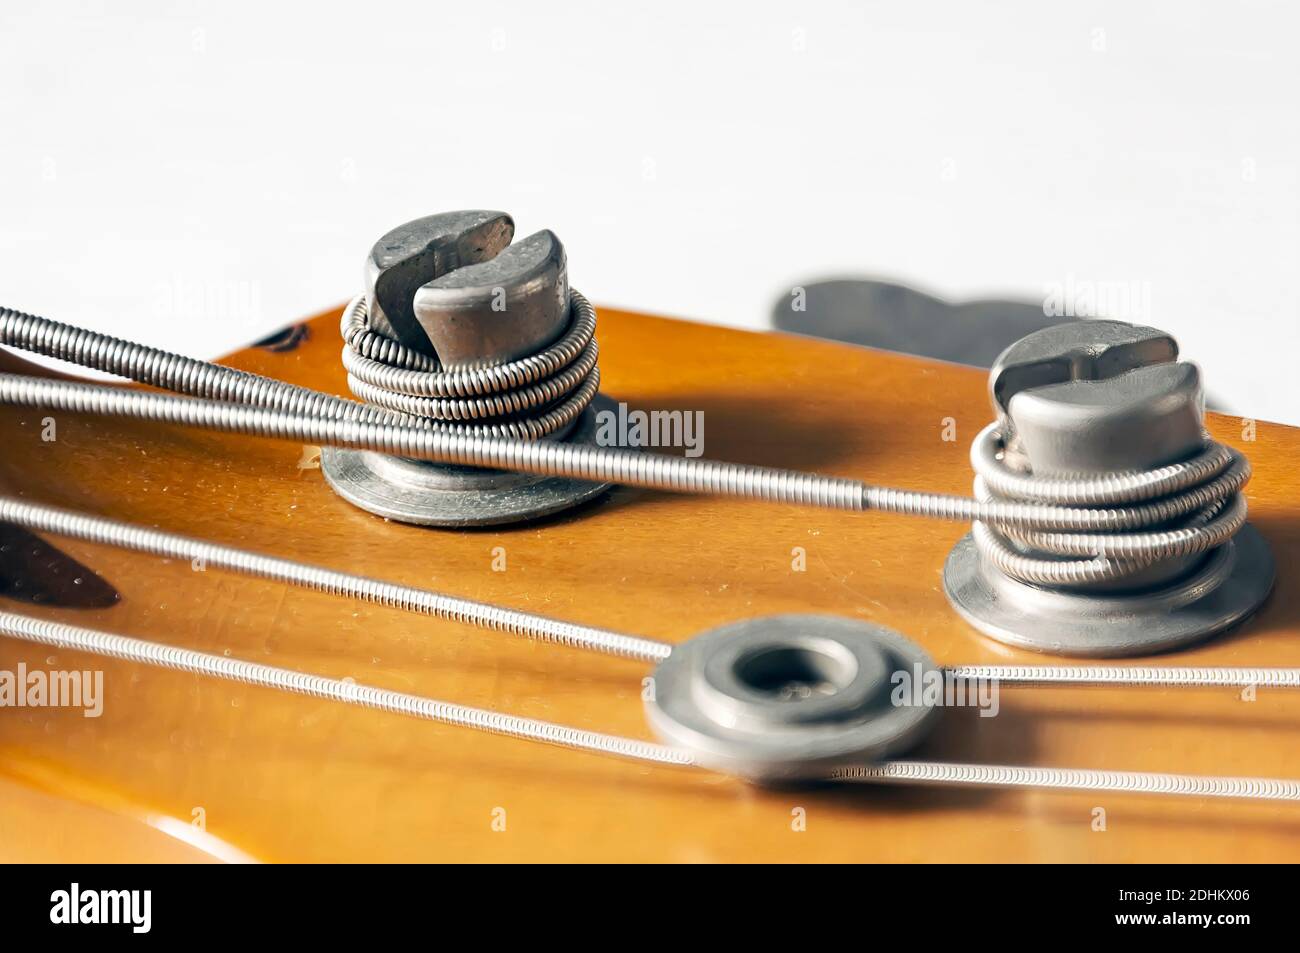 Detail of a tuning post on the wooden headstock of an electric bass guitar. Musical instruments and mechanics for string tuning. Stock Photo